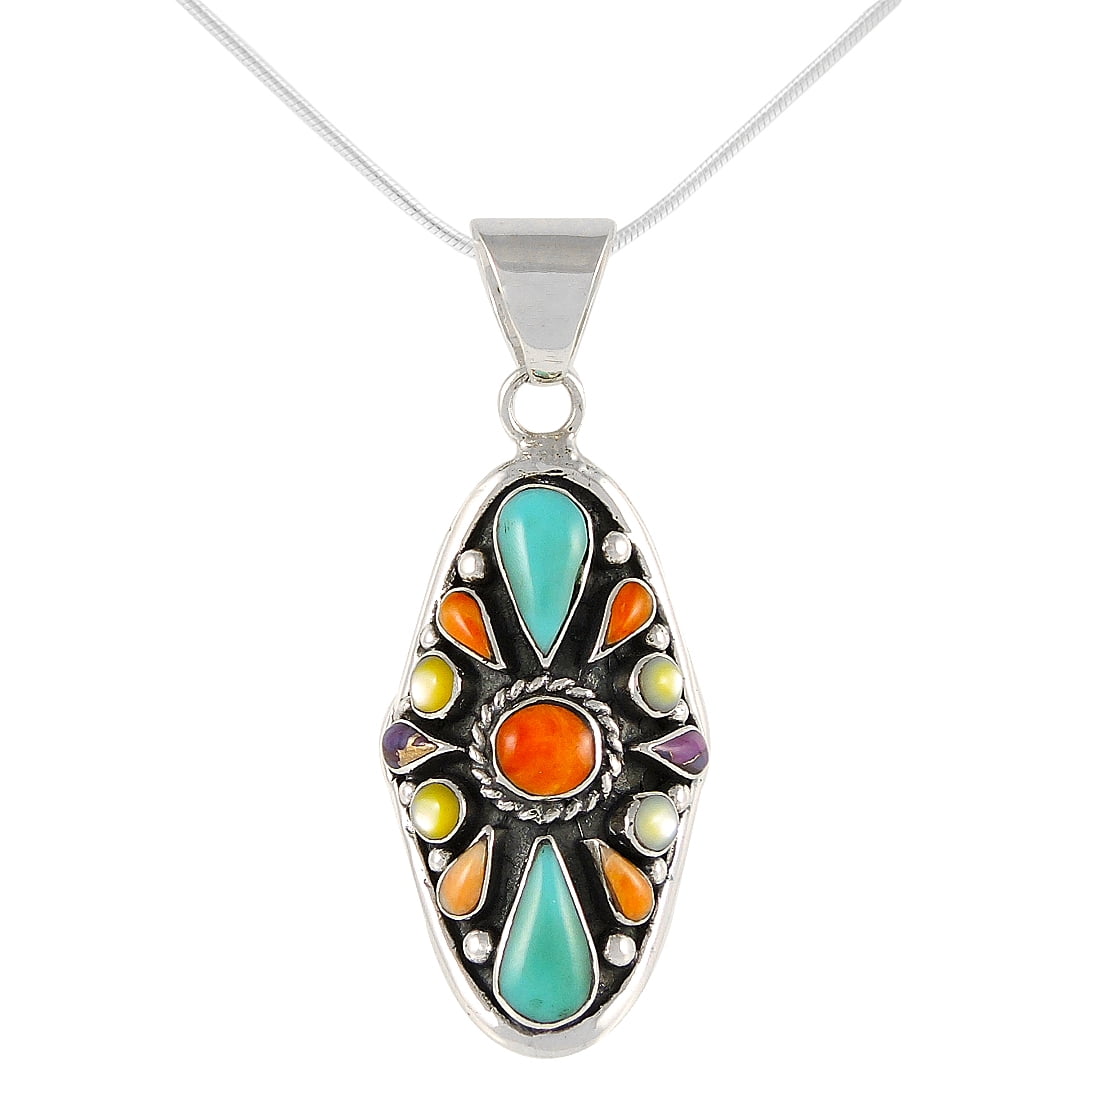 Turquoise Necklace 925 Sterling Silver & Genuine Turquoise and Semiprecious Gemstones Pendant 20 